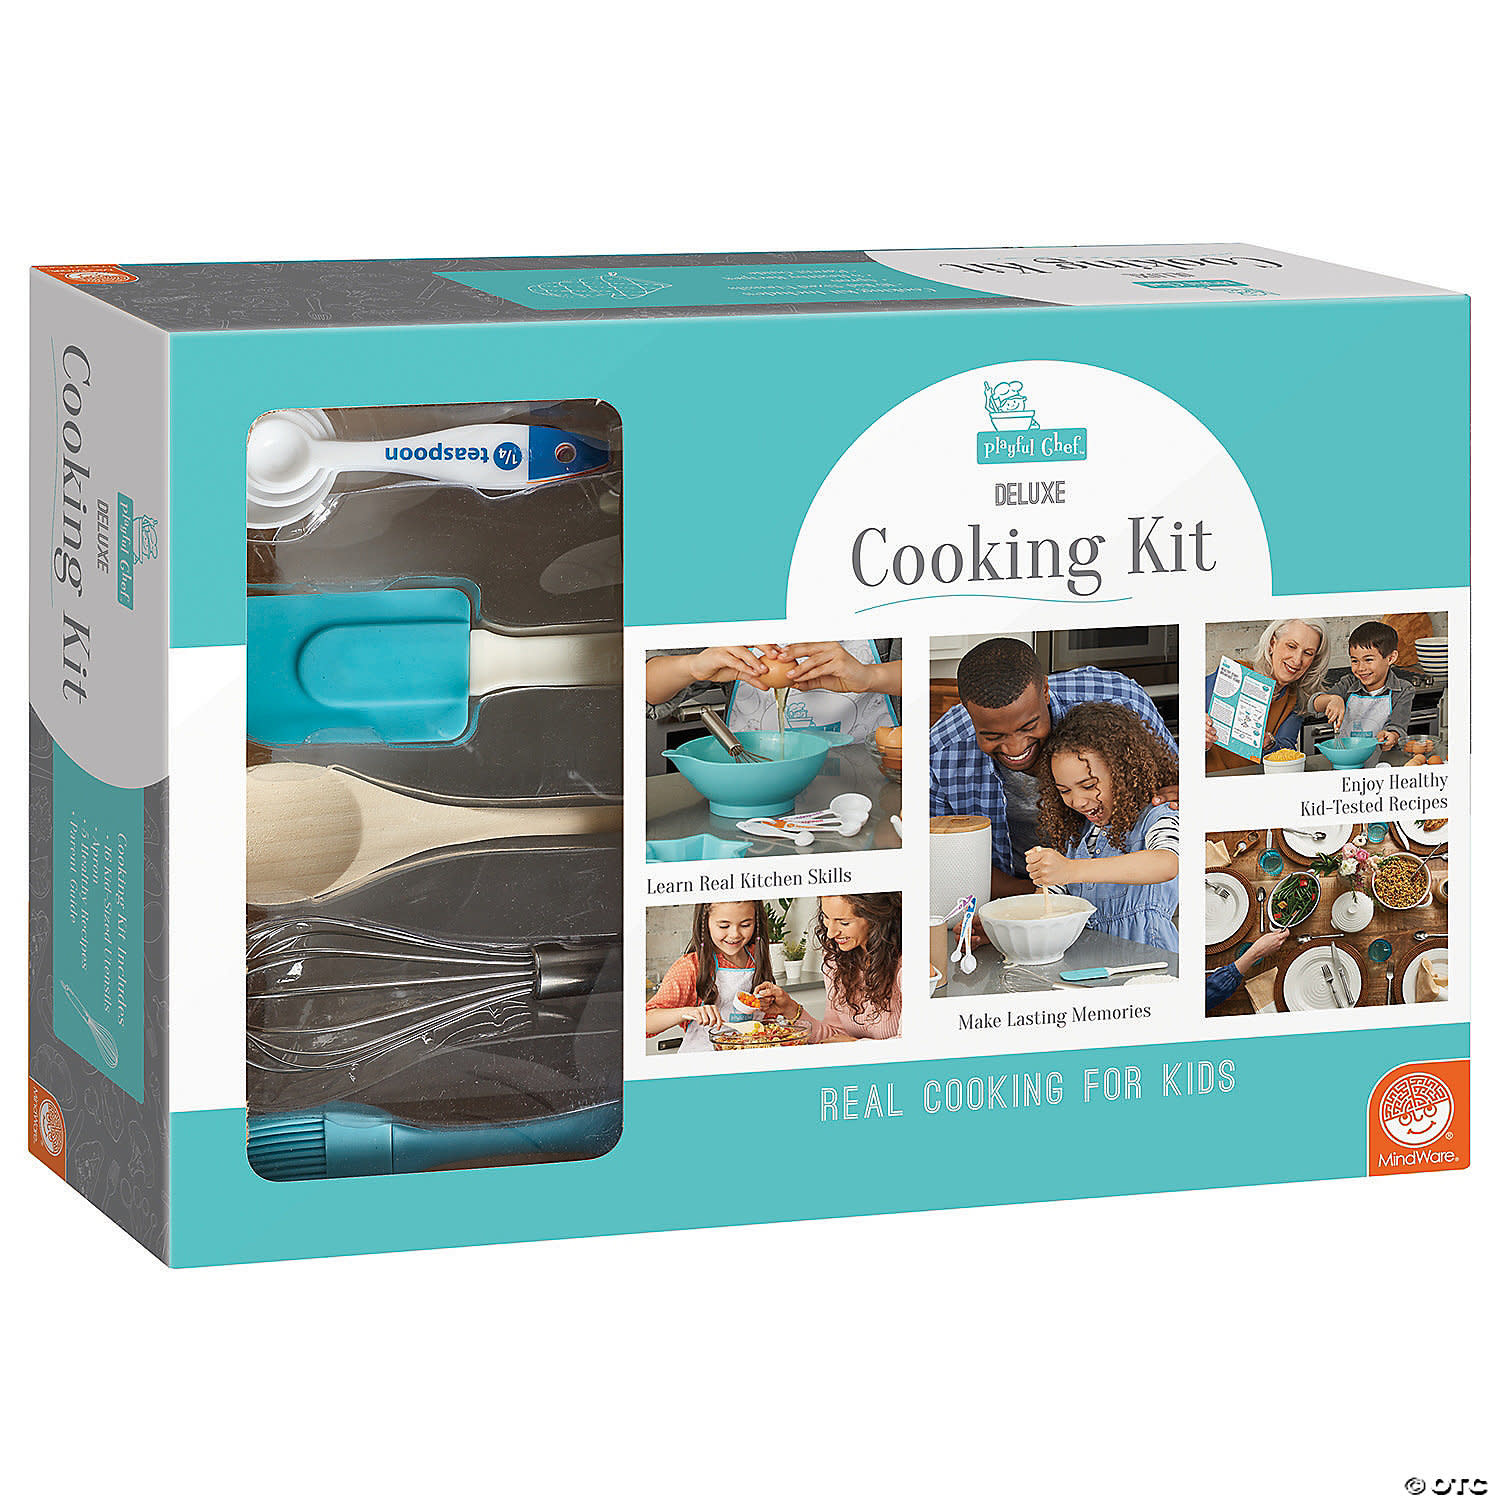 Mindware Playful Chef: Deluxe Cooking Kit-4